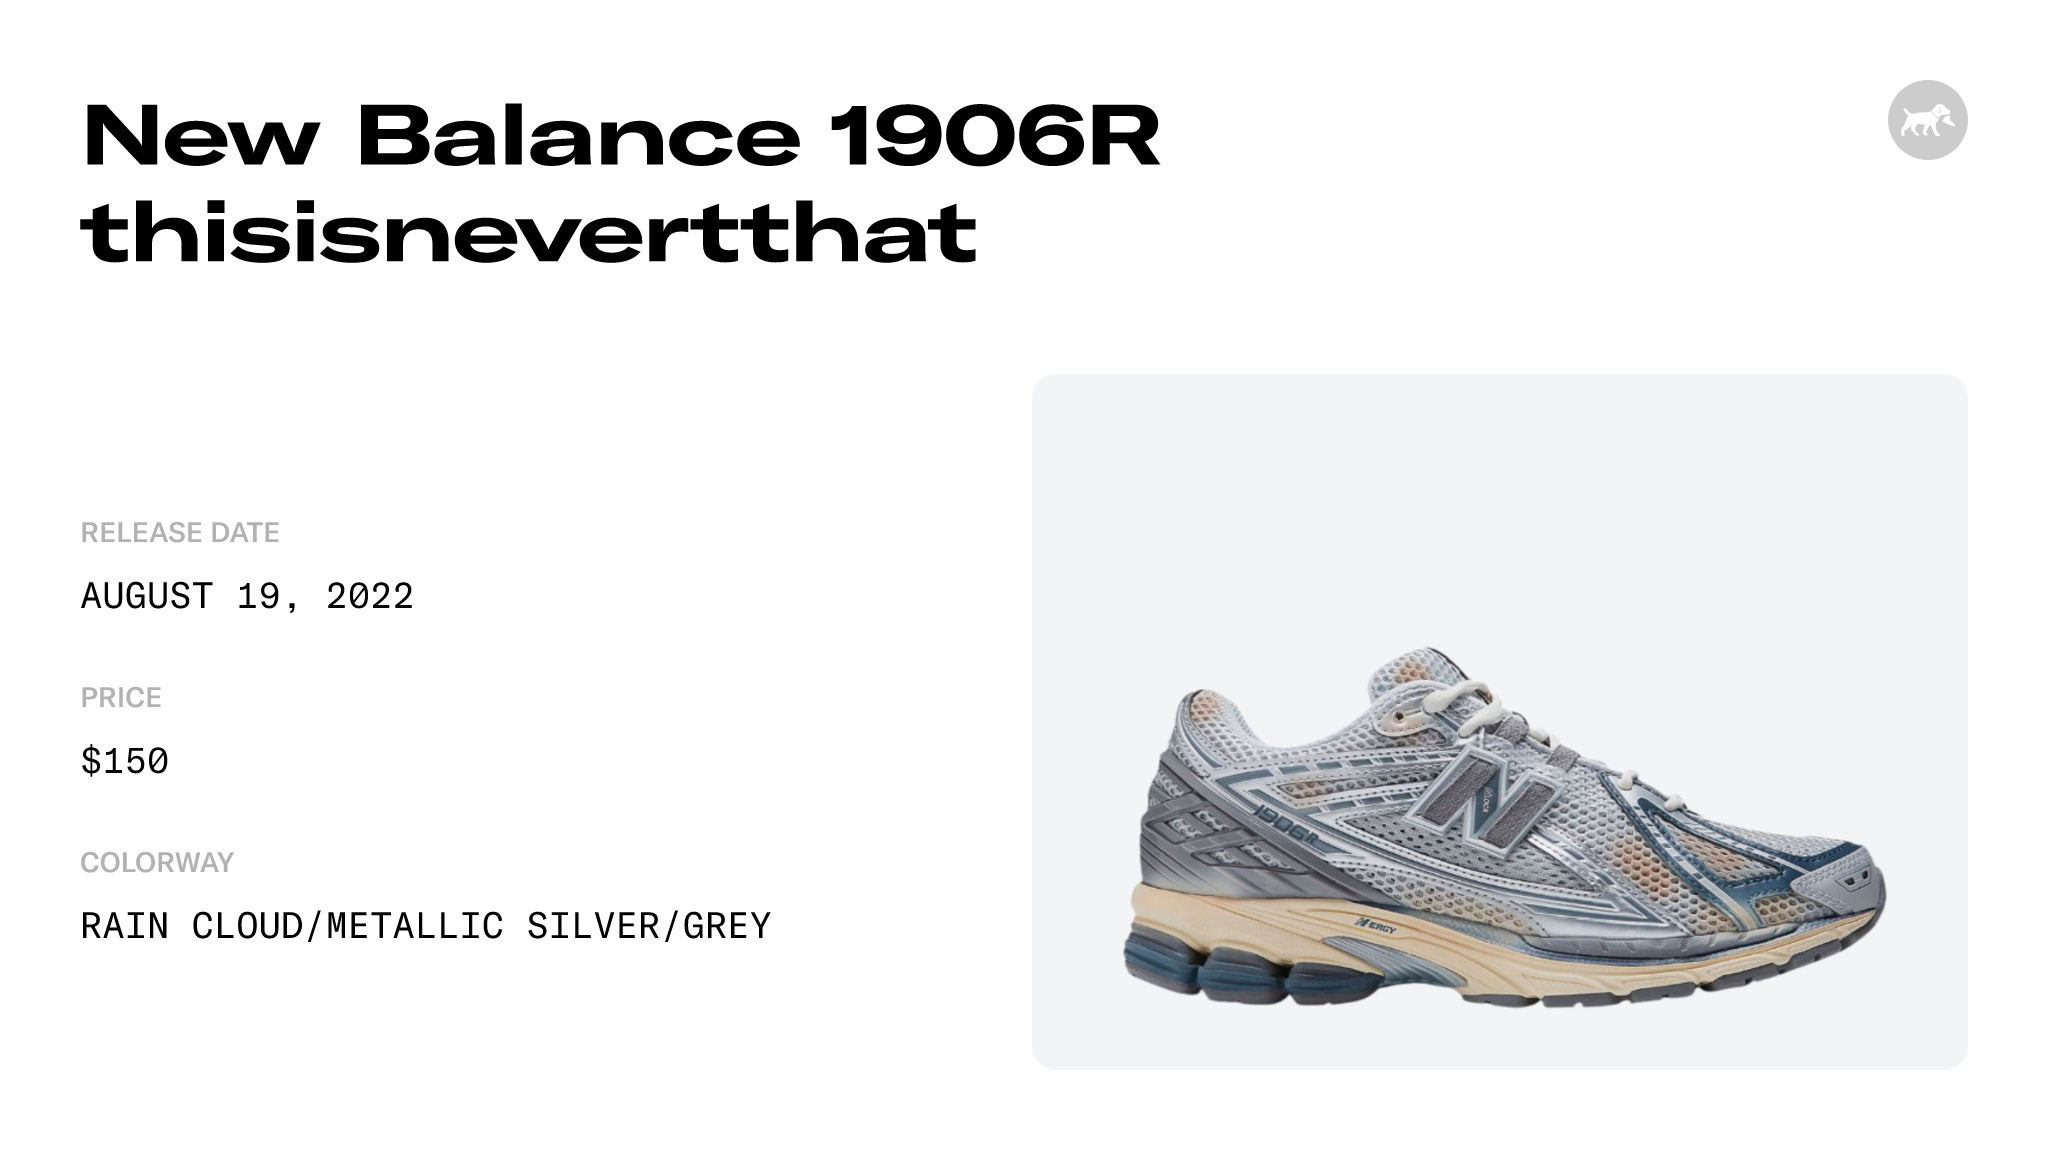 New Balance 1906R thisisnevertthat - M1906RTI Raffles and Release Date